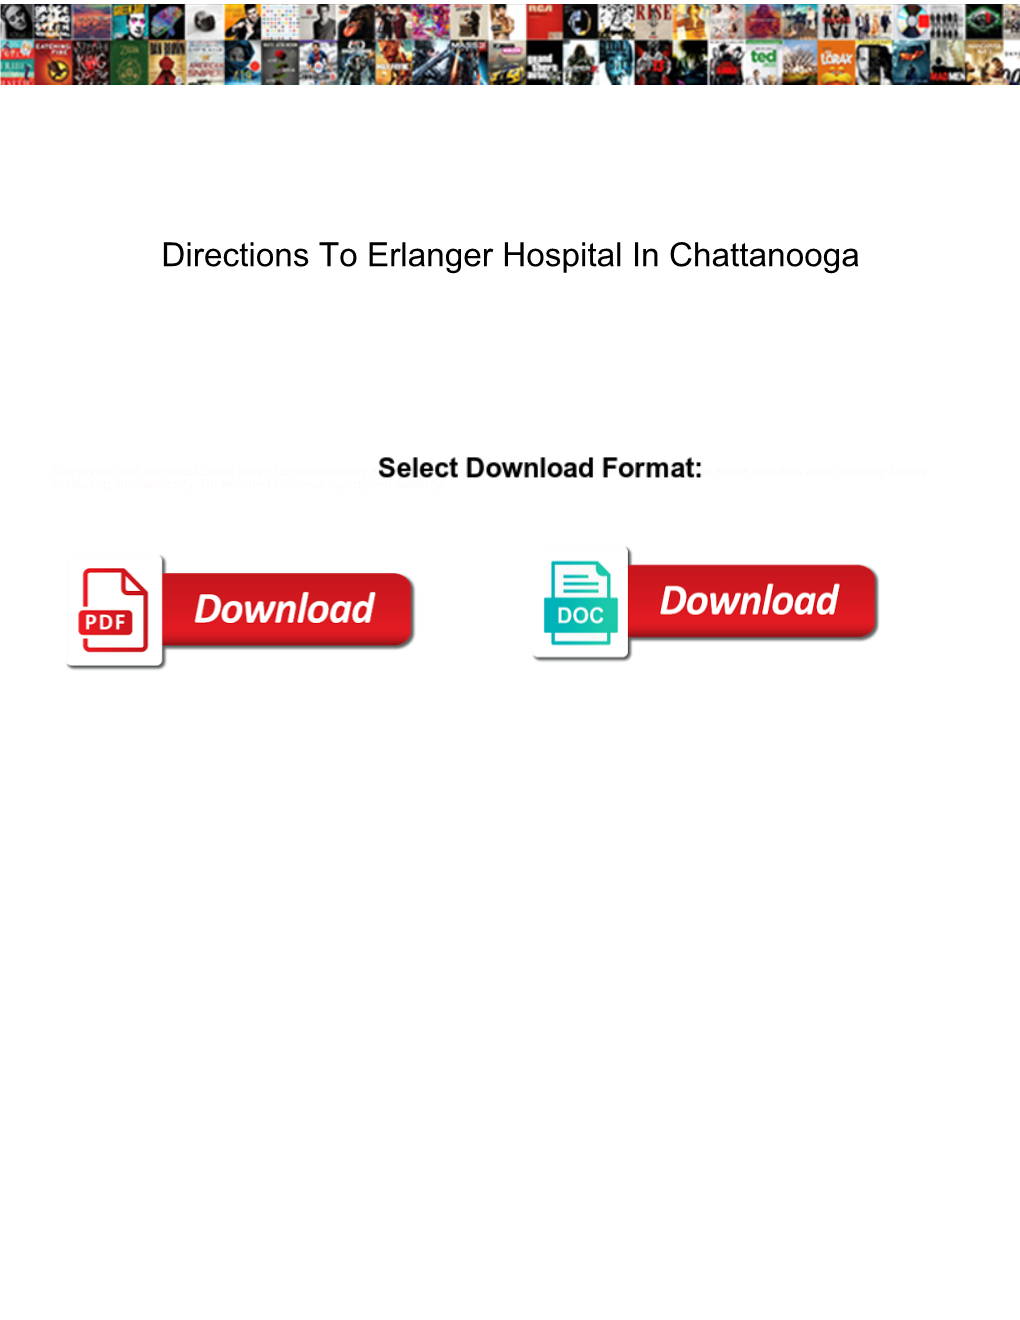 Directions to Erlanger Hospital in Chattanooga